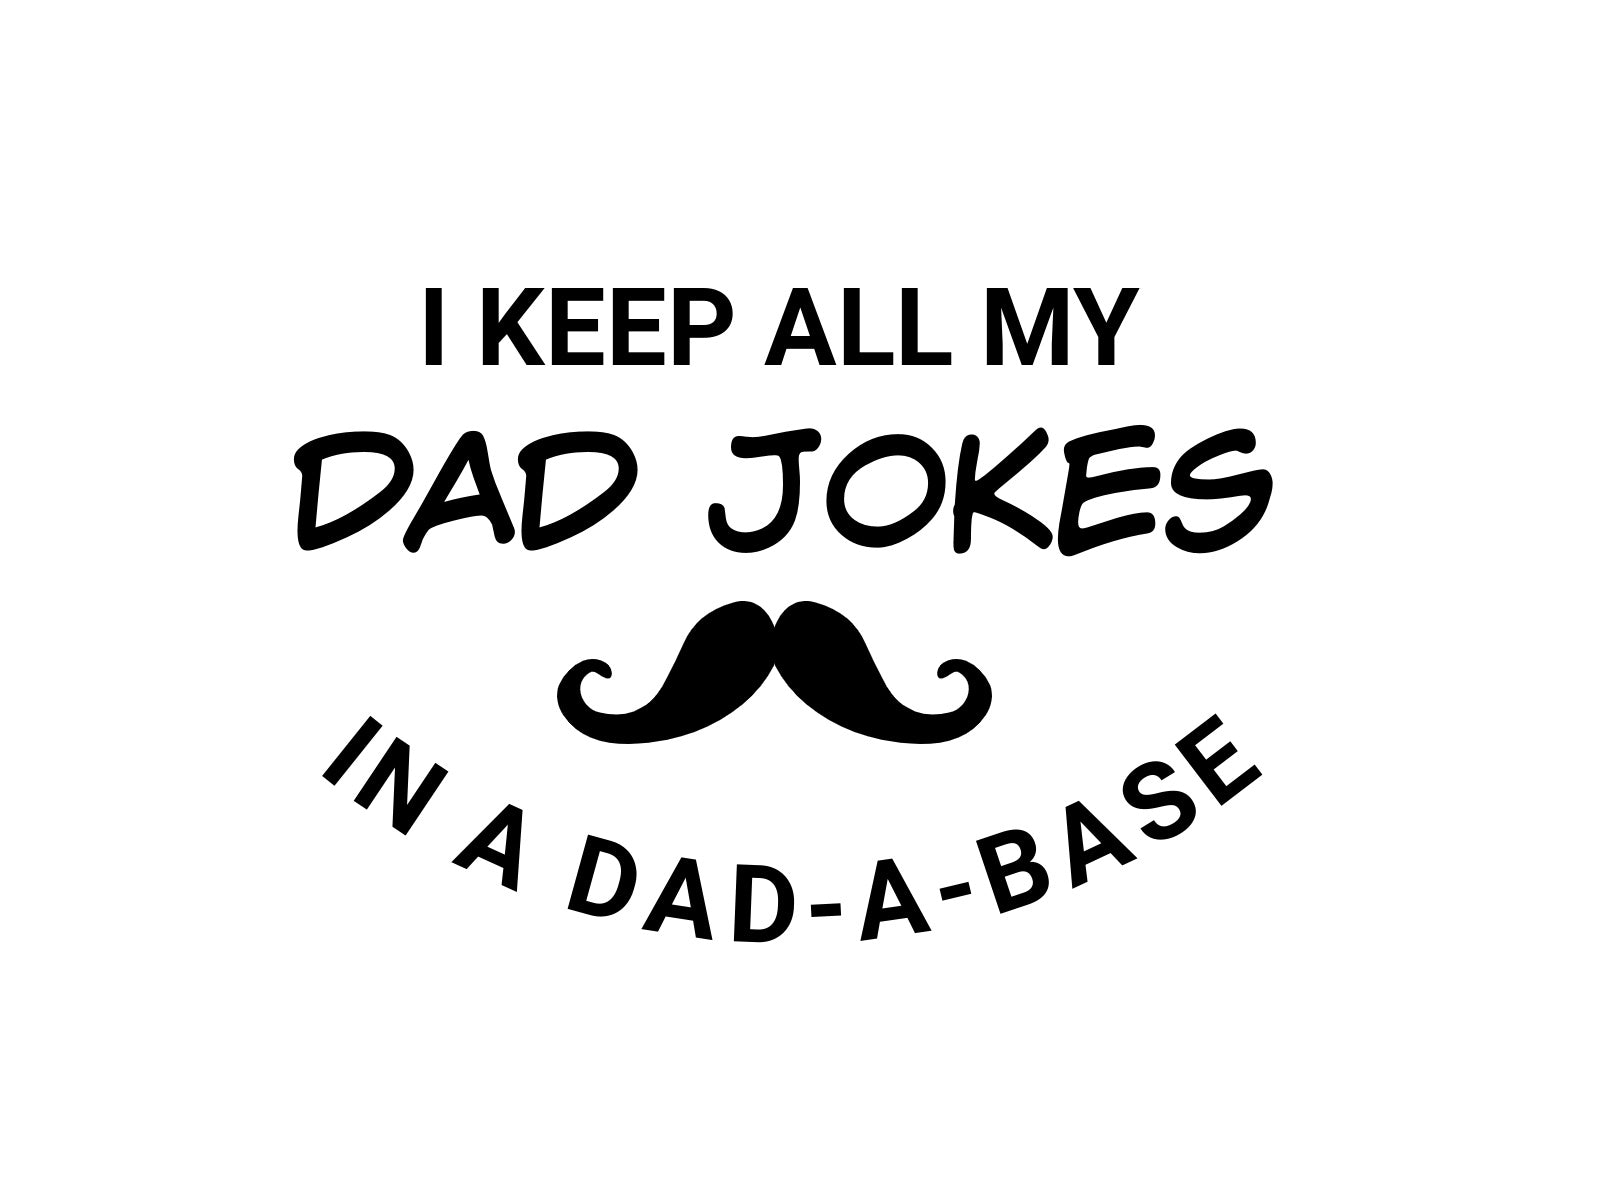 I Keep All My Dad Jokes In A Dad-A-Base